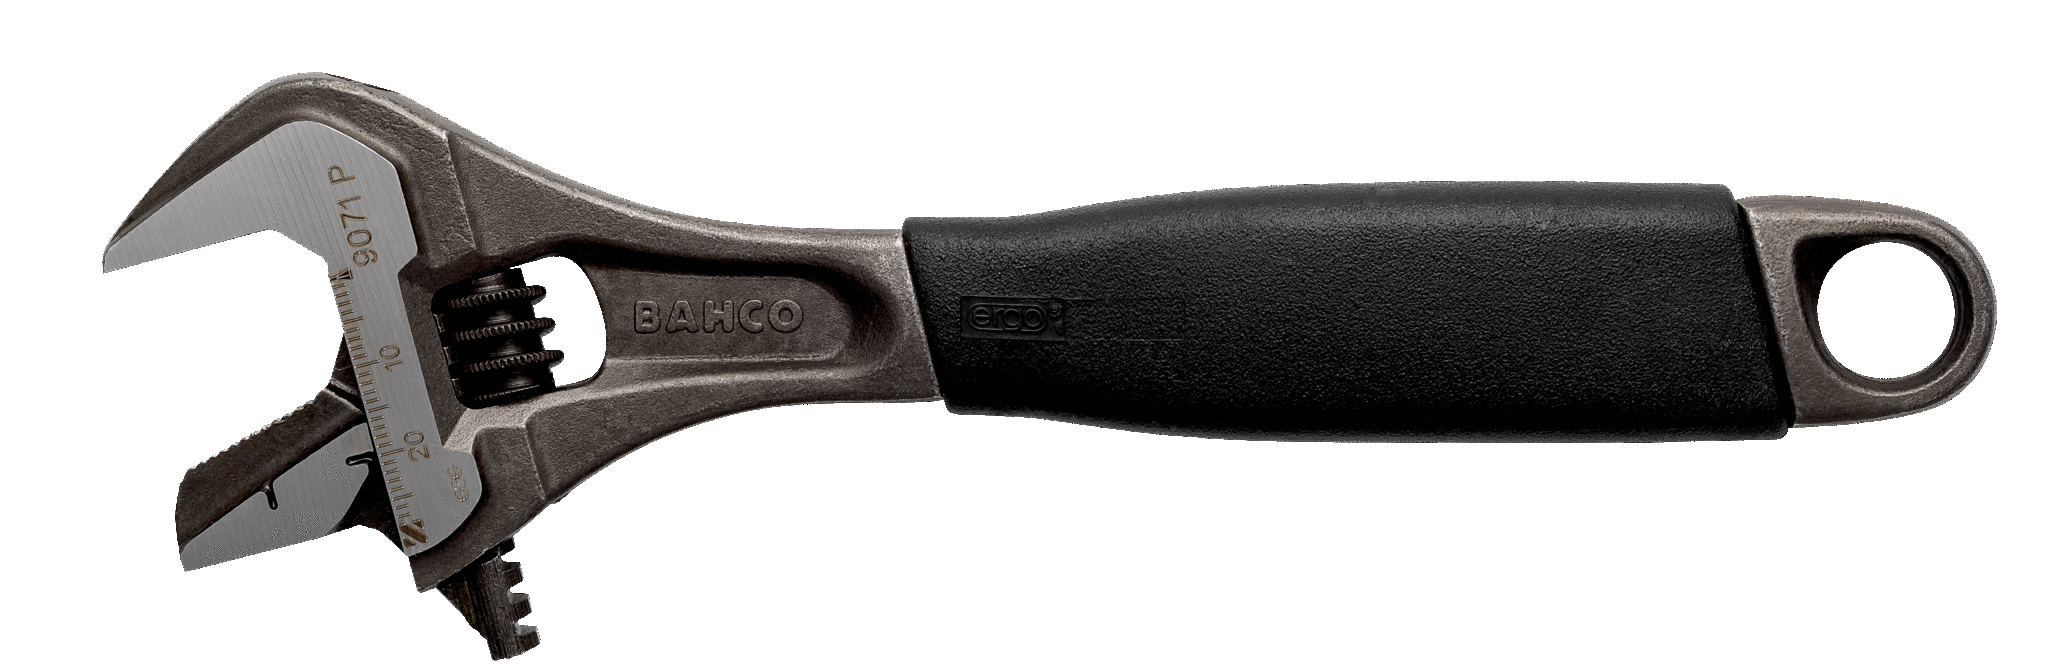 ERGO™ rubber handle central nut phosphated adjustable wrench, with reversible jaw - 9070 P by Bahco